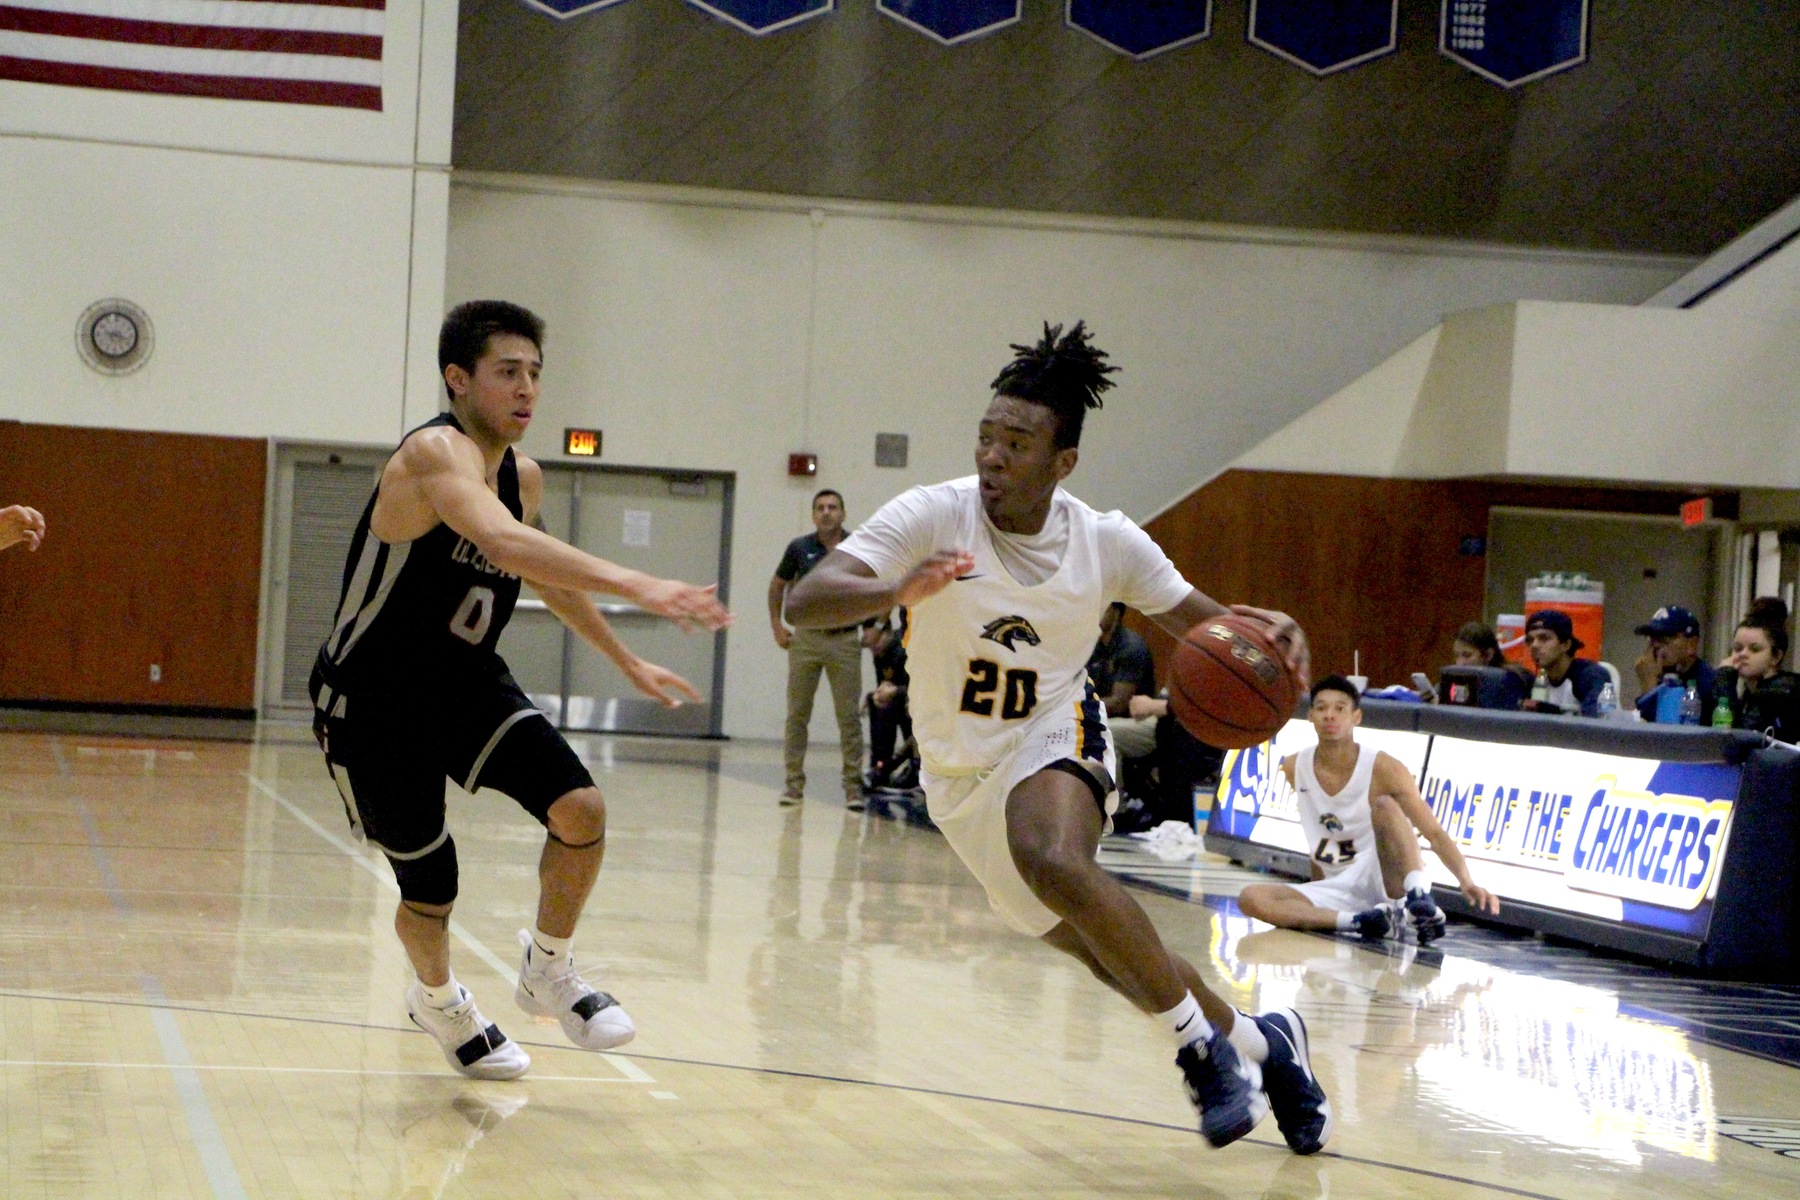 Chargers Finish 11-5 in Non-Conference Play; Set for OEC Opener